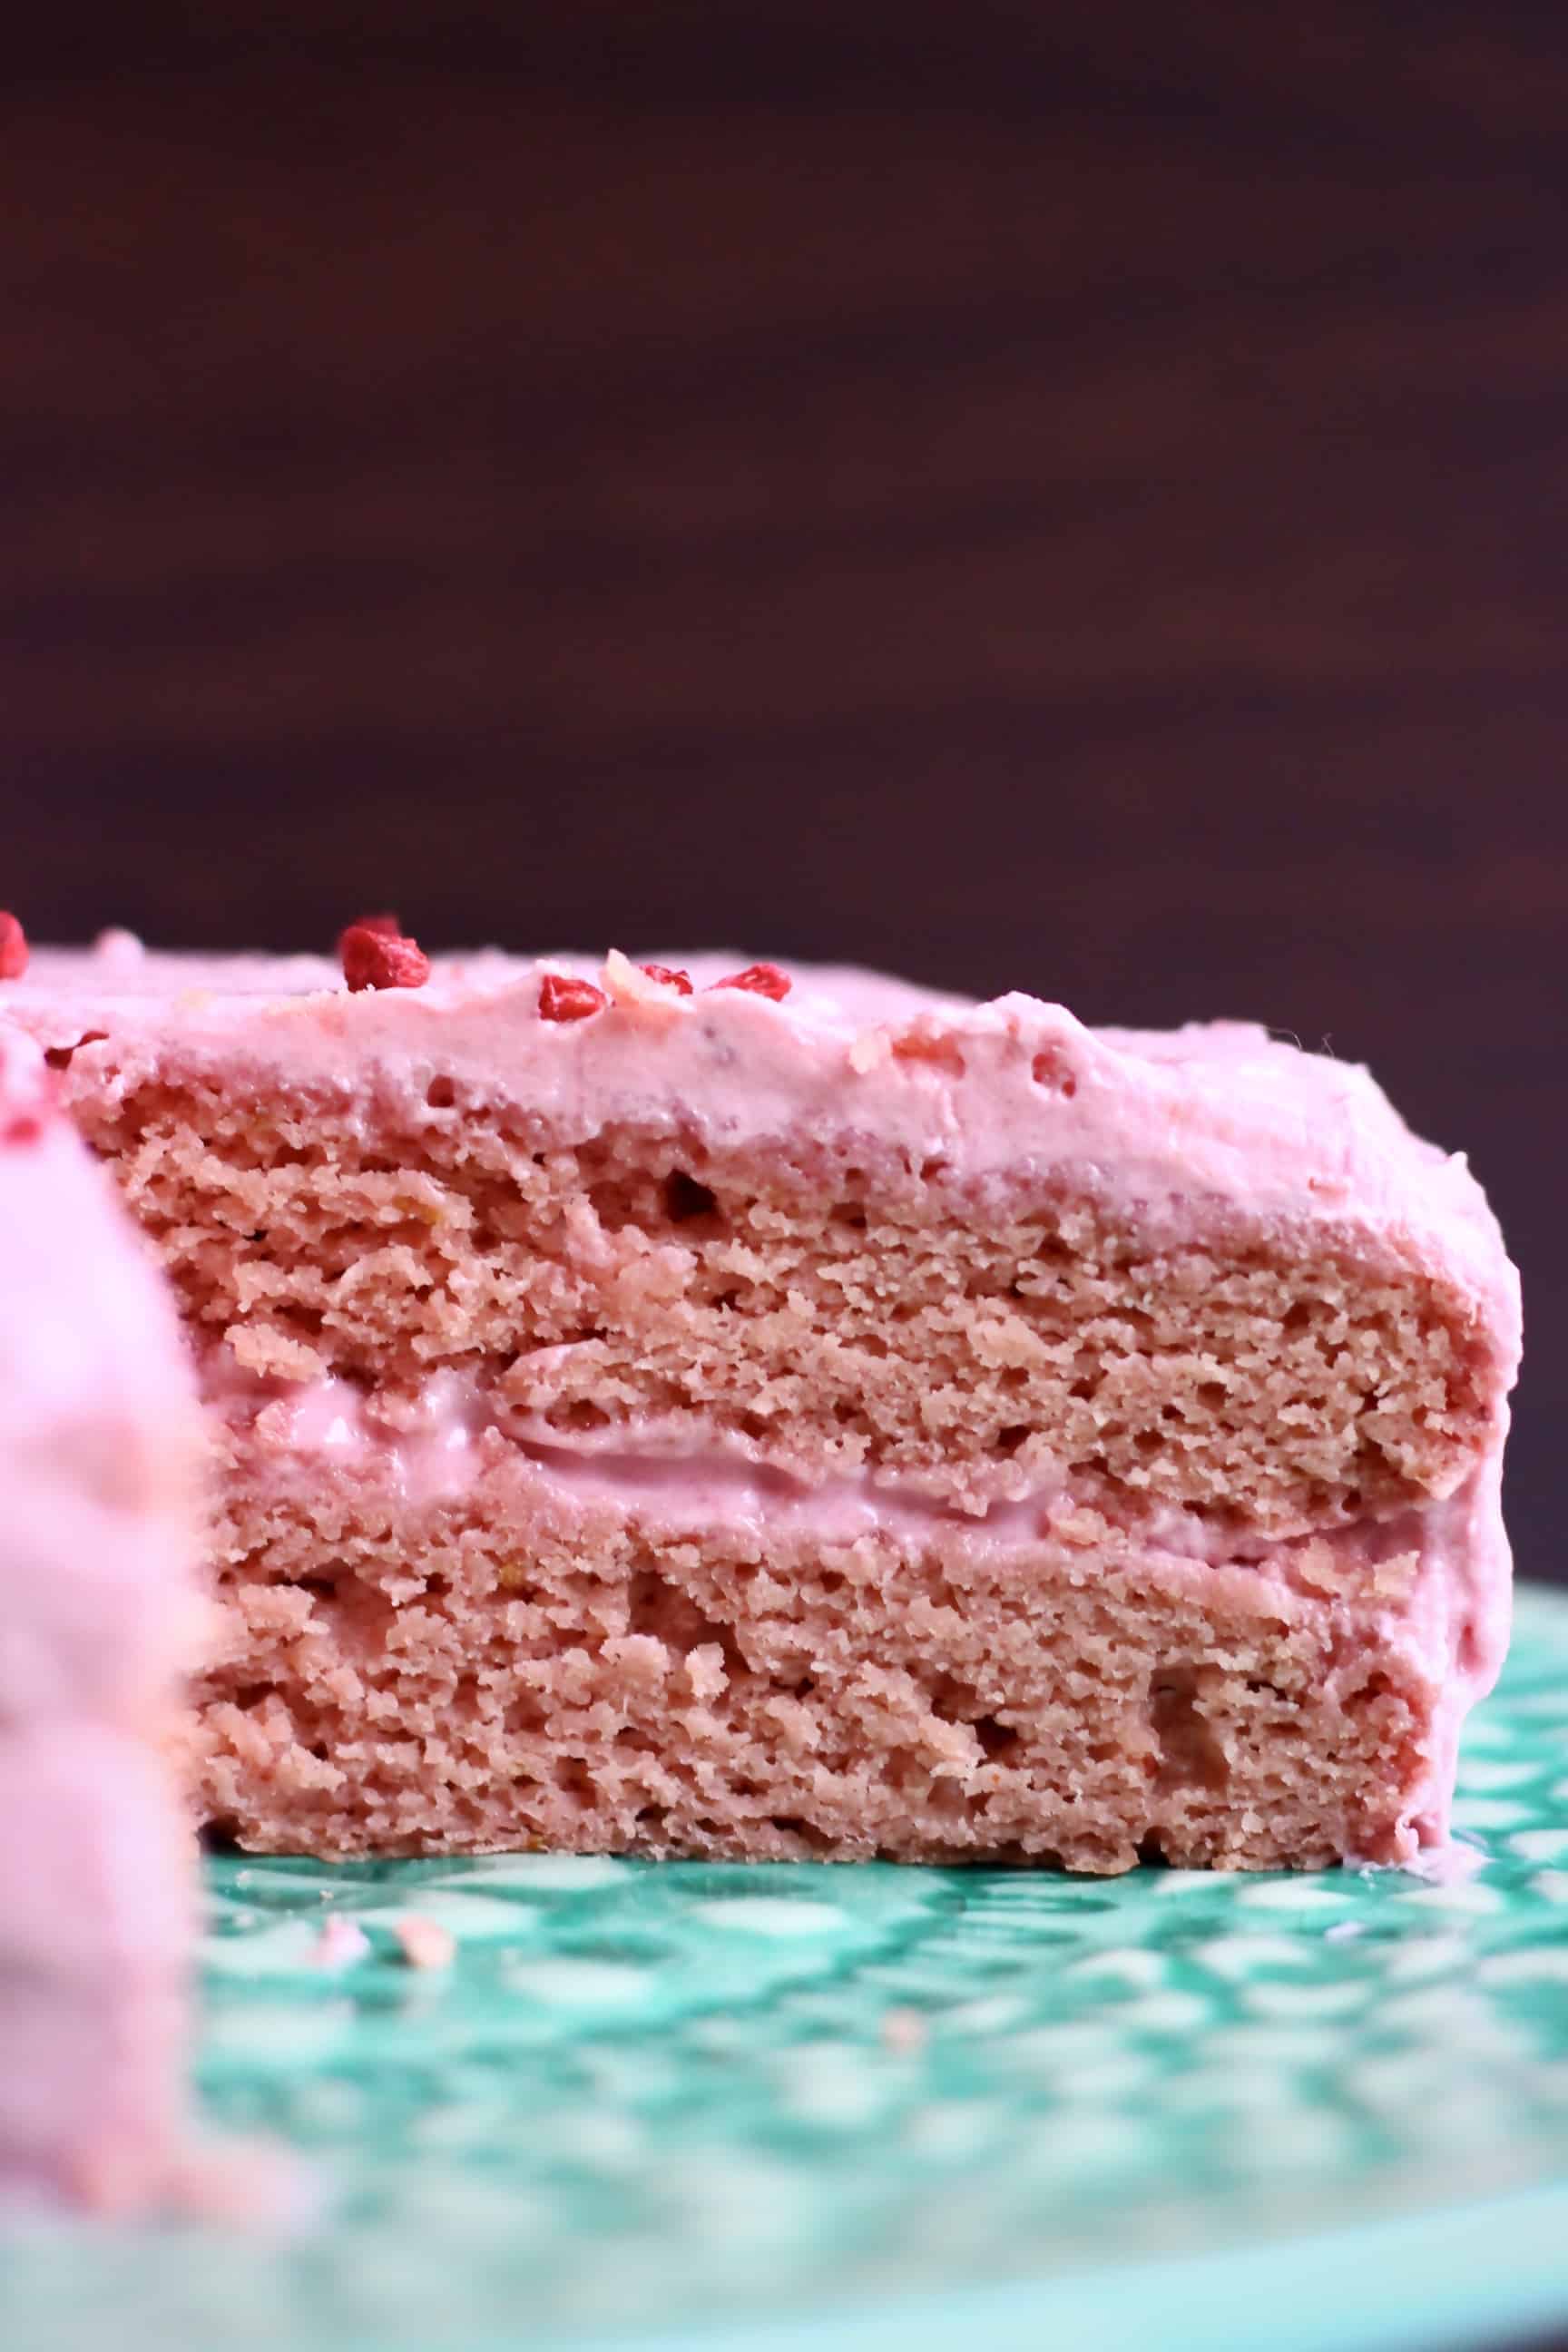 A gluten-free vegan strawberry cake with pink strawberry frosting